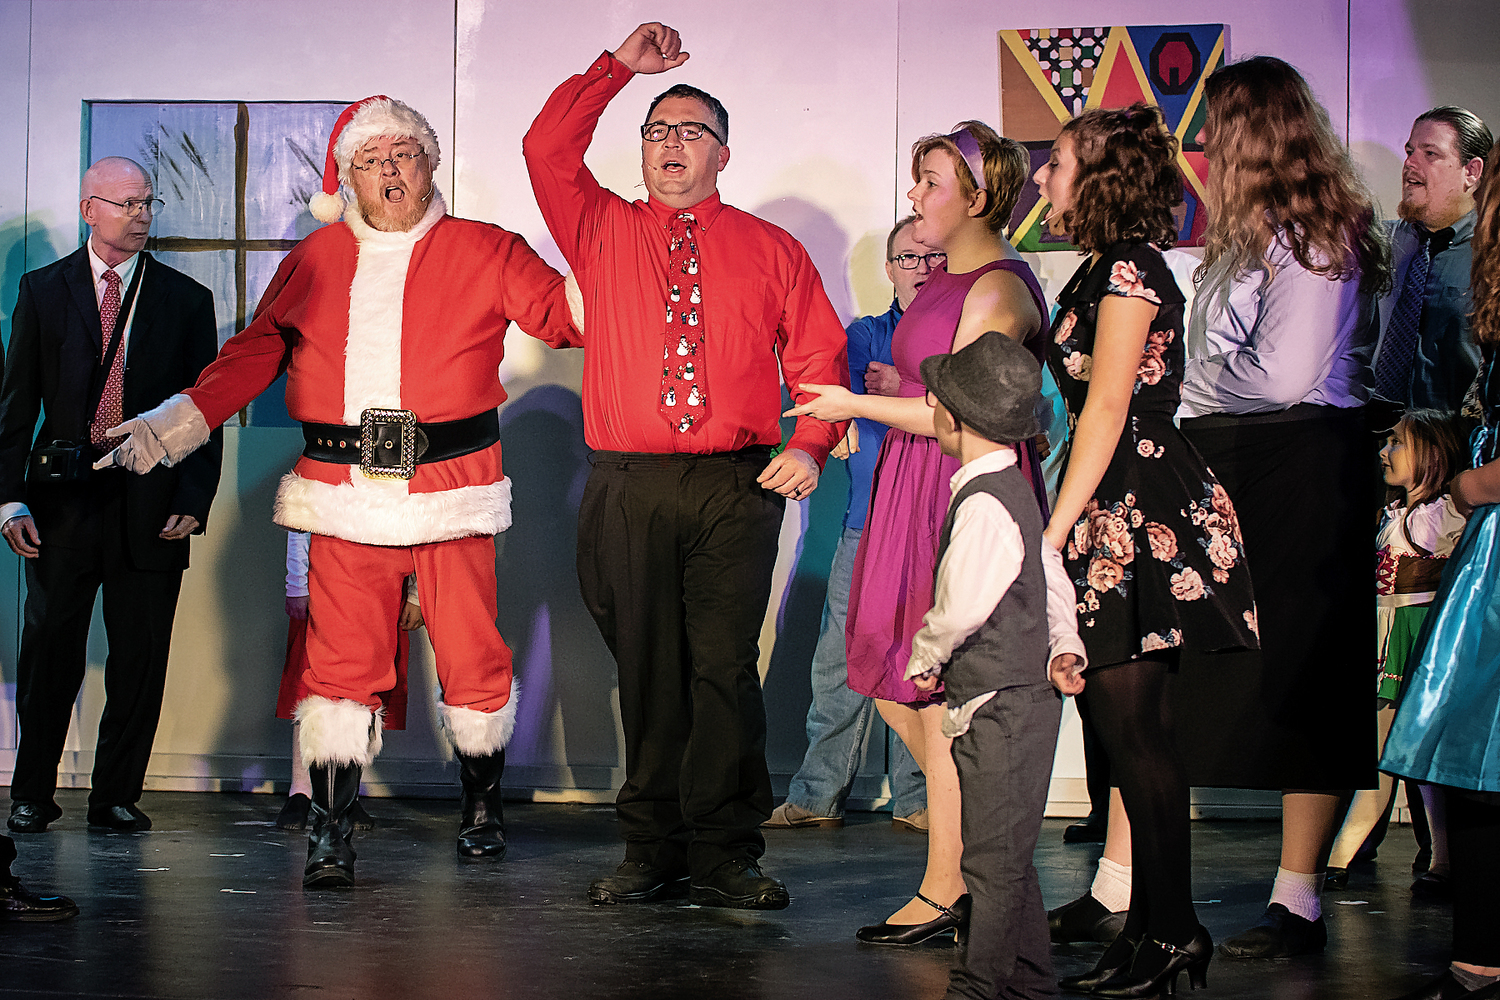 BWW Review: MIRACLE ON 34TH STREET at Artistic Synergy Of Baltimore Spreads Lots of Christmas Magic 